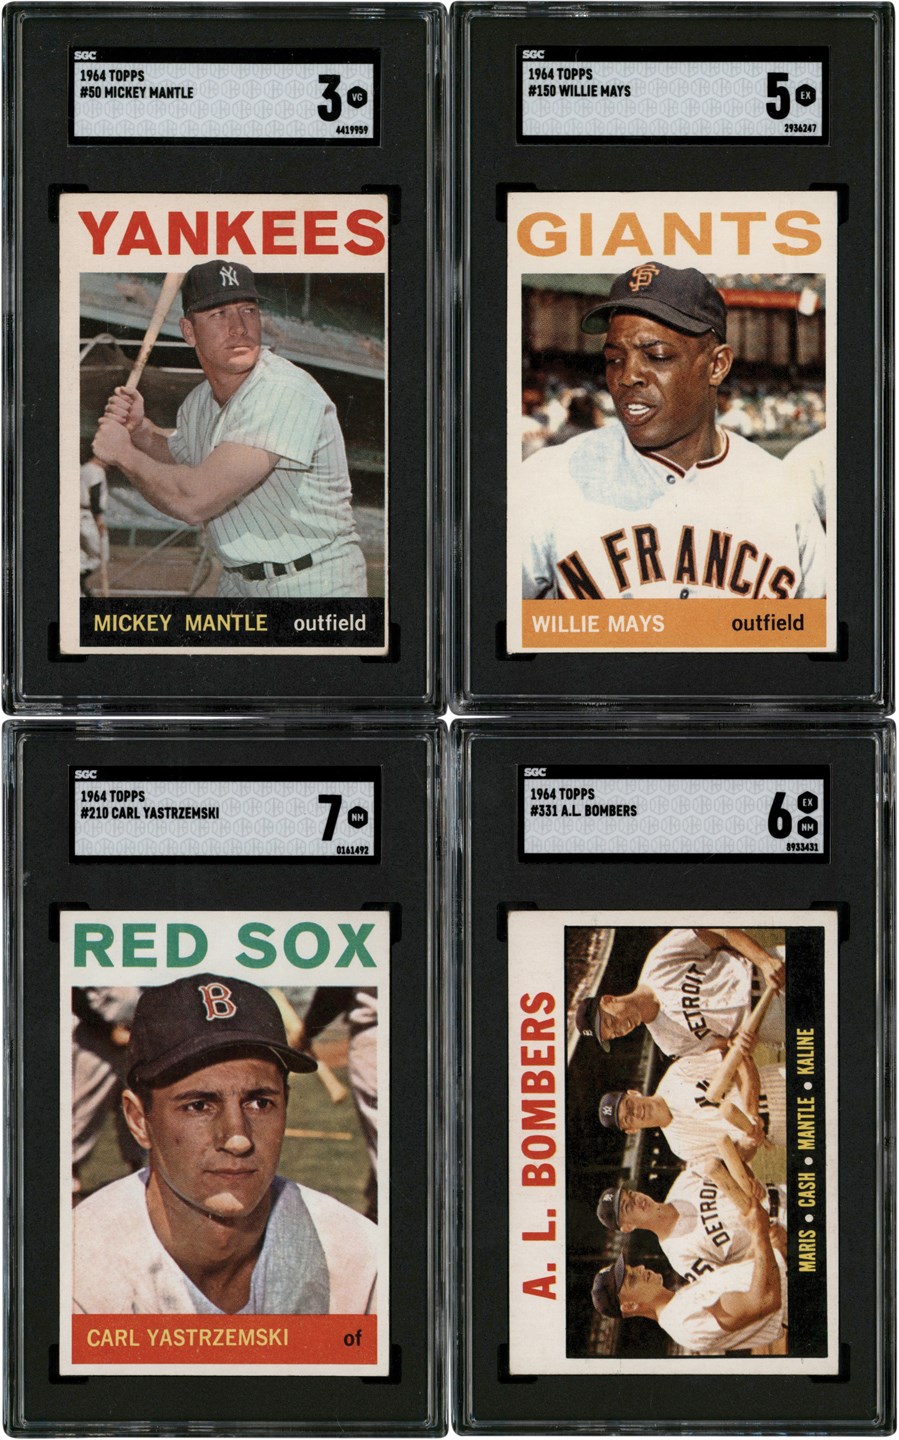 - 1964 Topps Complete Set w/SGC Mantle & Mays (587)